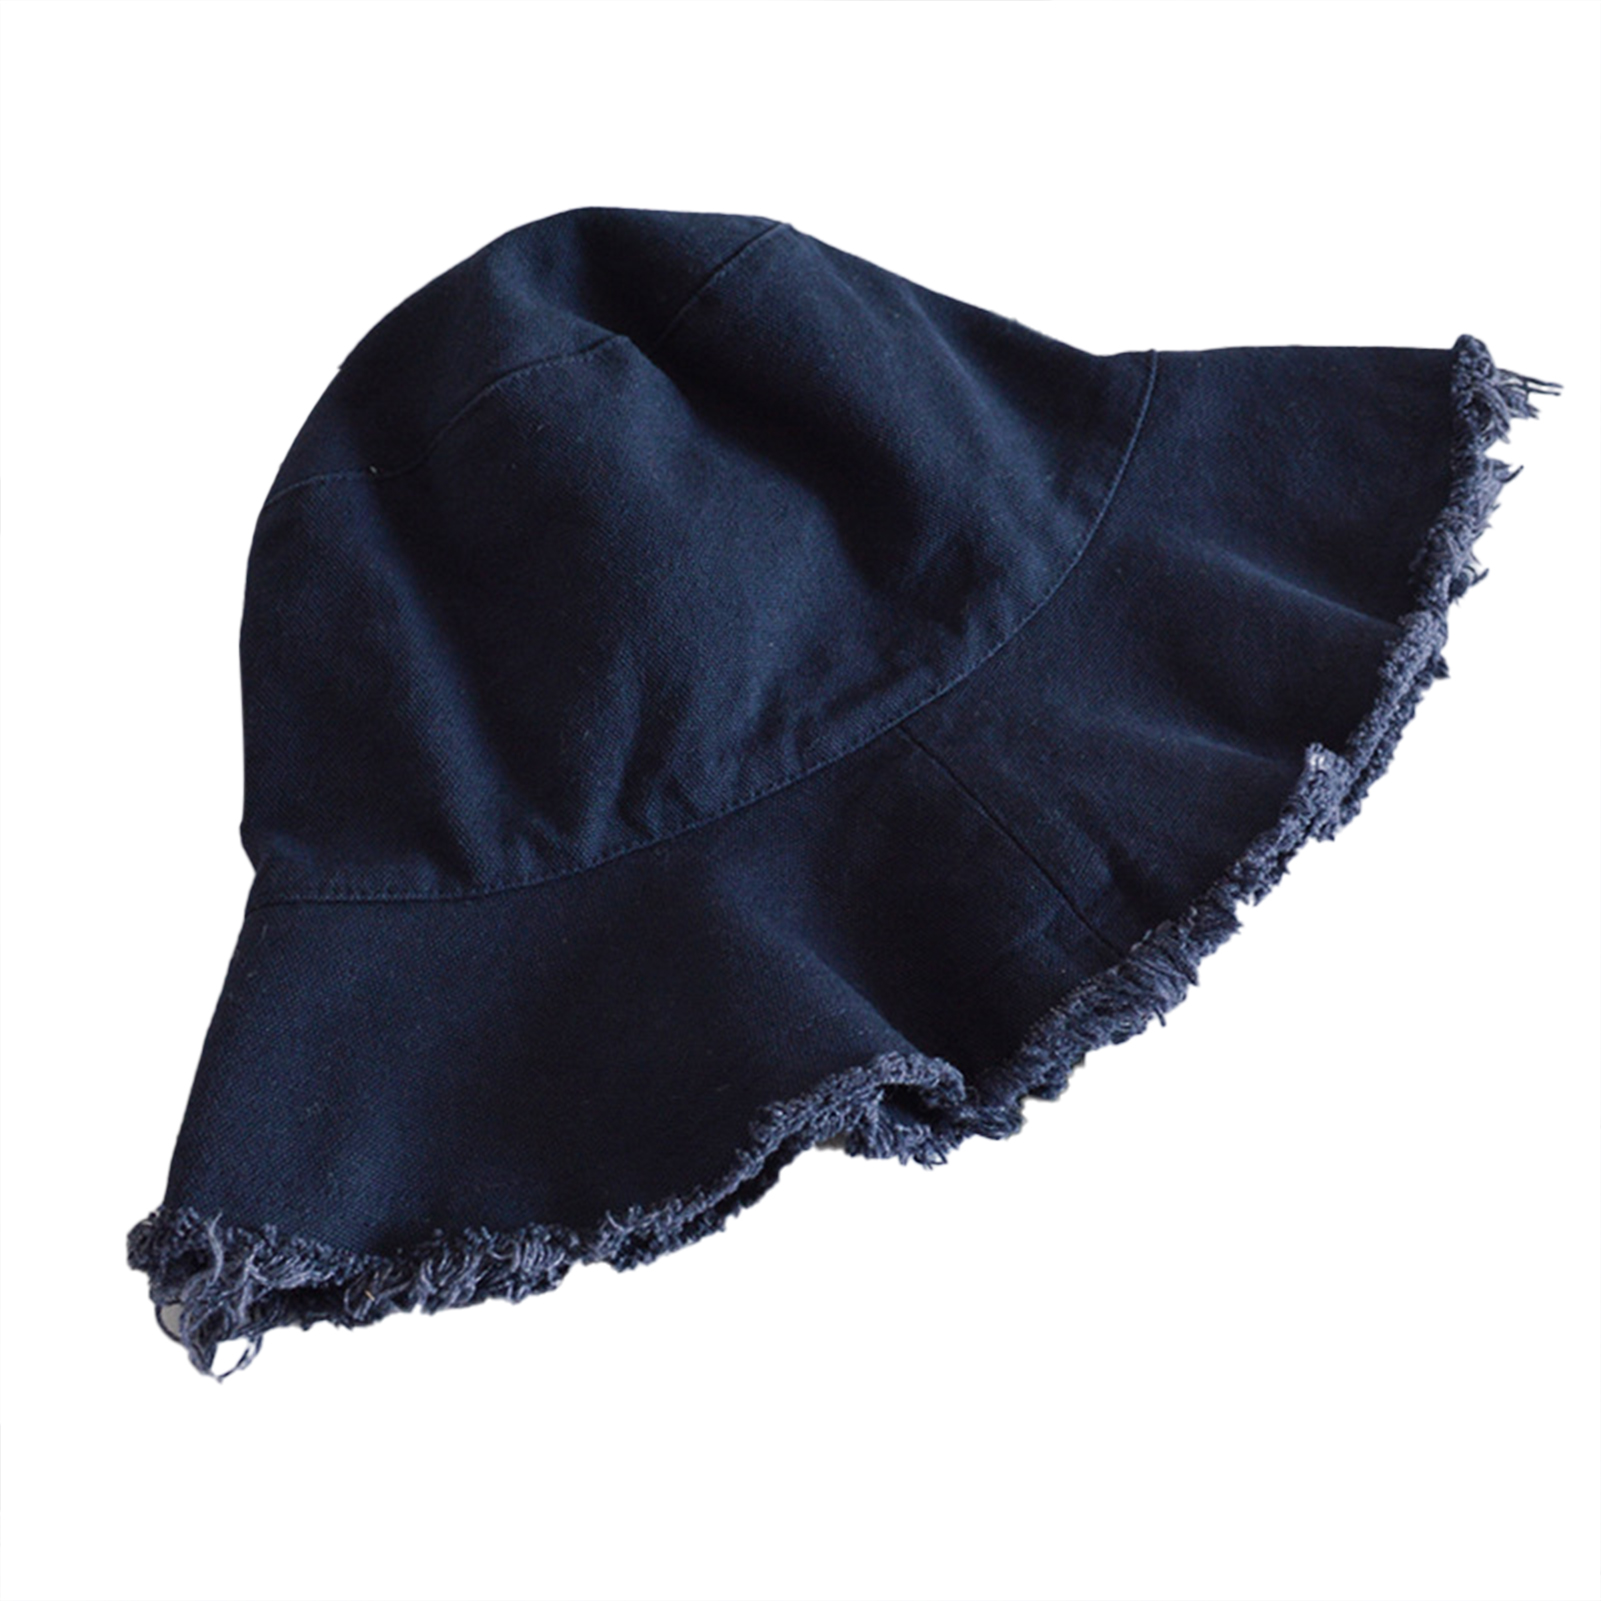 SANWOOD Bucket Hat Navy Blue,Sunhat Sunshade Foldable Women Retro Fisherman Hat Woven Cap for Party - image 1 of 6